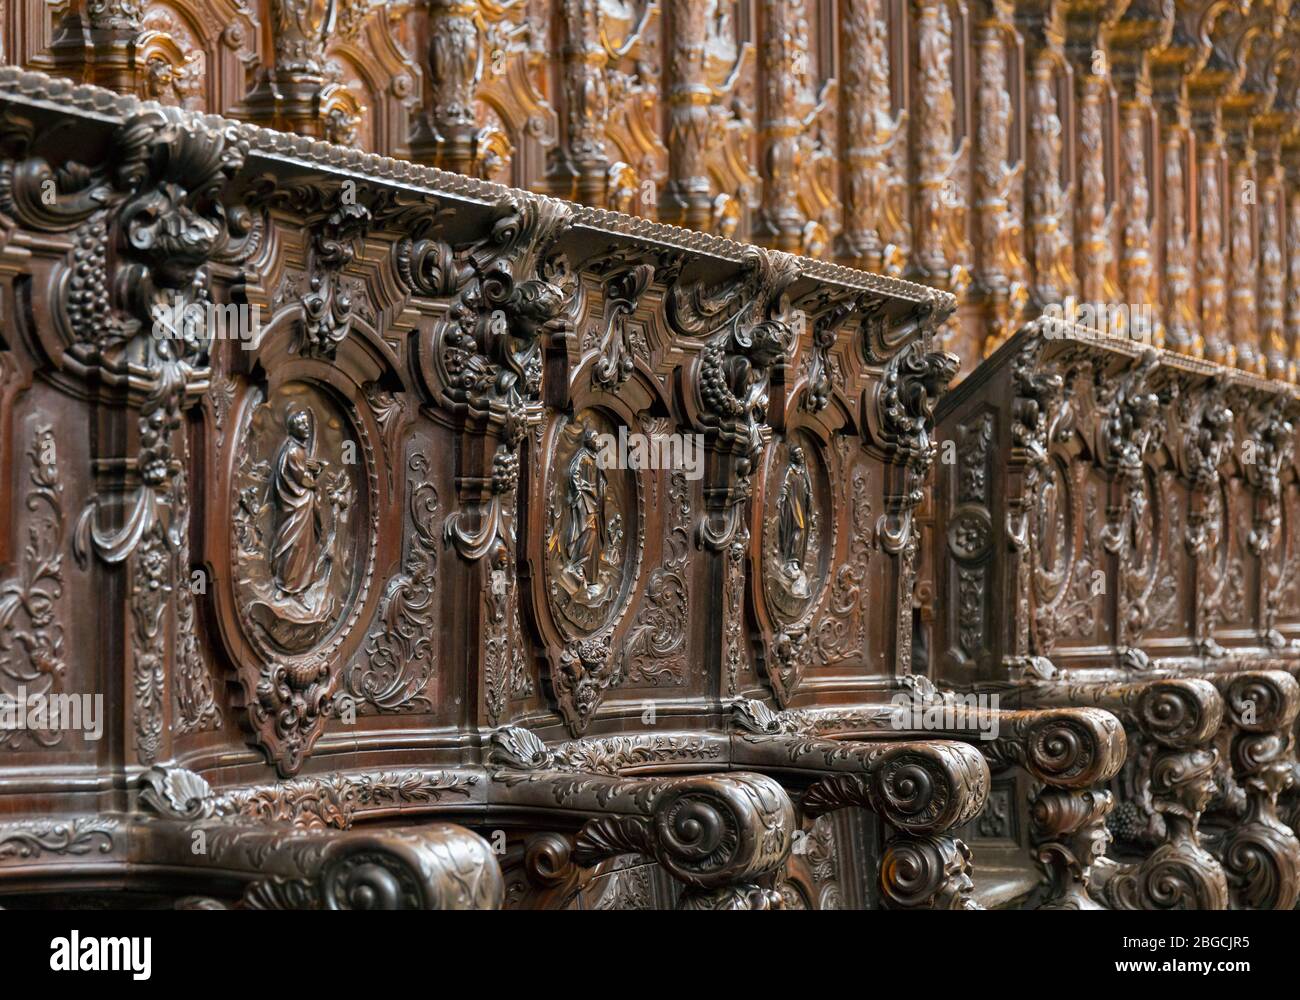 La Mezquita.  The Mosque.  Interior.  The 18th century carved wood choir stalls in the cathedral rear of the mosque.  They are the work of  Spanish sc Stock Photo